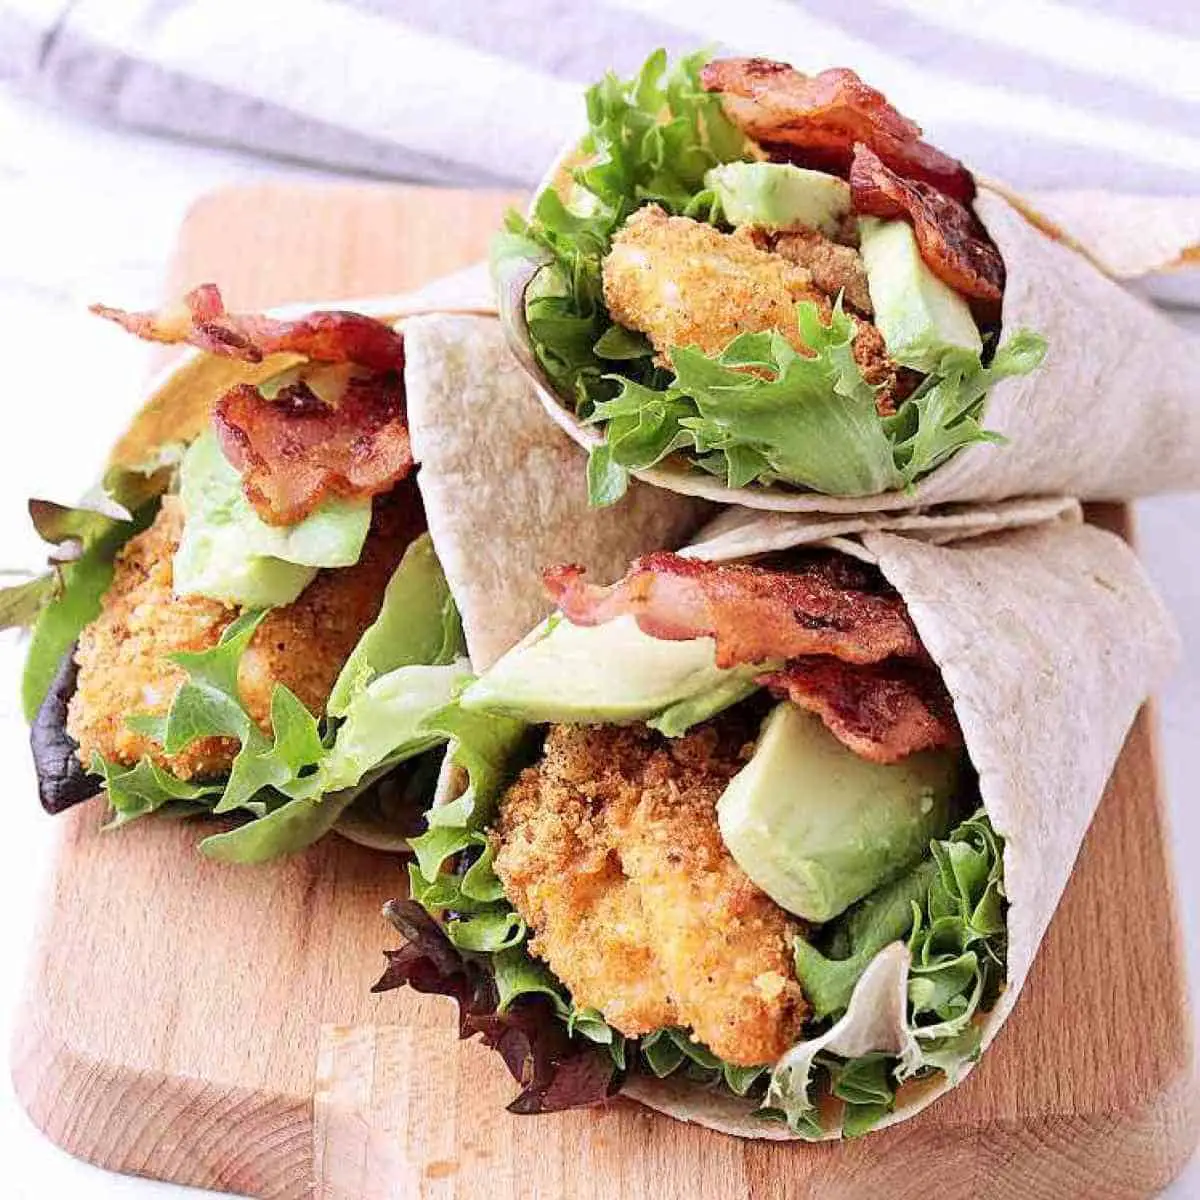 The perfect lunch-to-go, this delicious Low Carb Chicken Wrap with Bacon and Avocado takes minutes to create for easy night time prep.